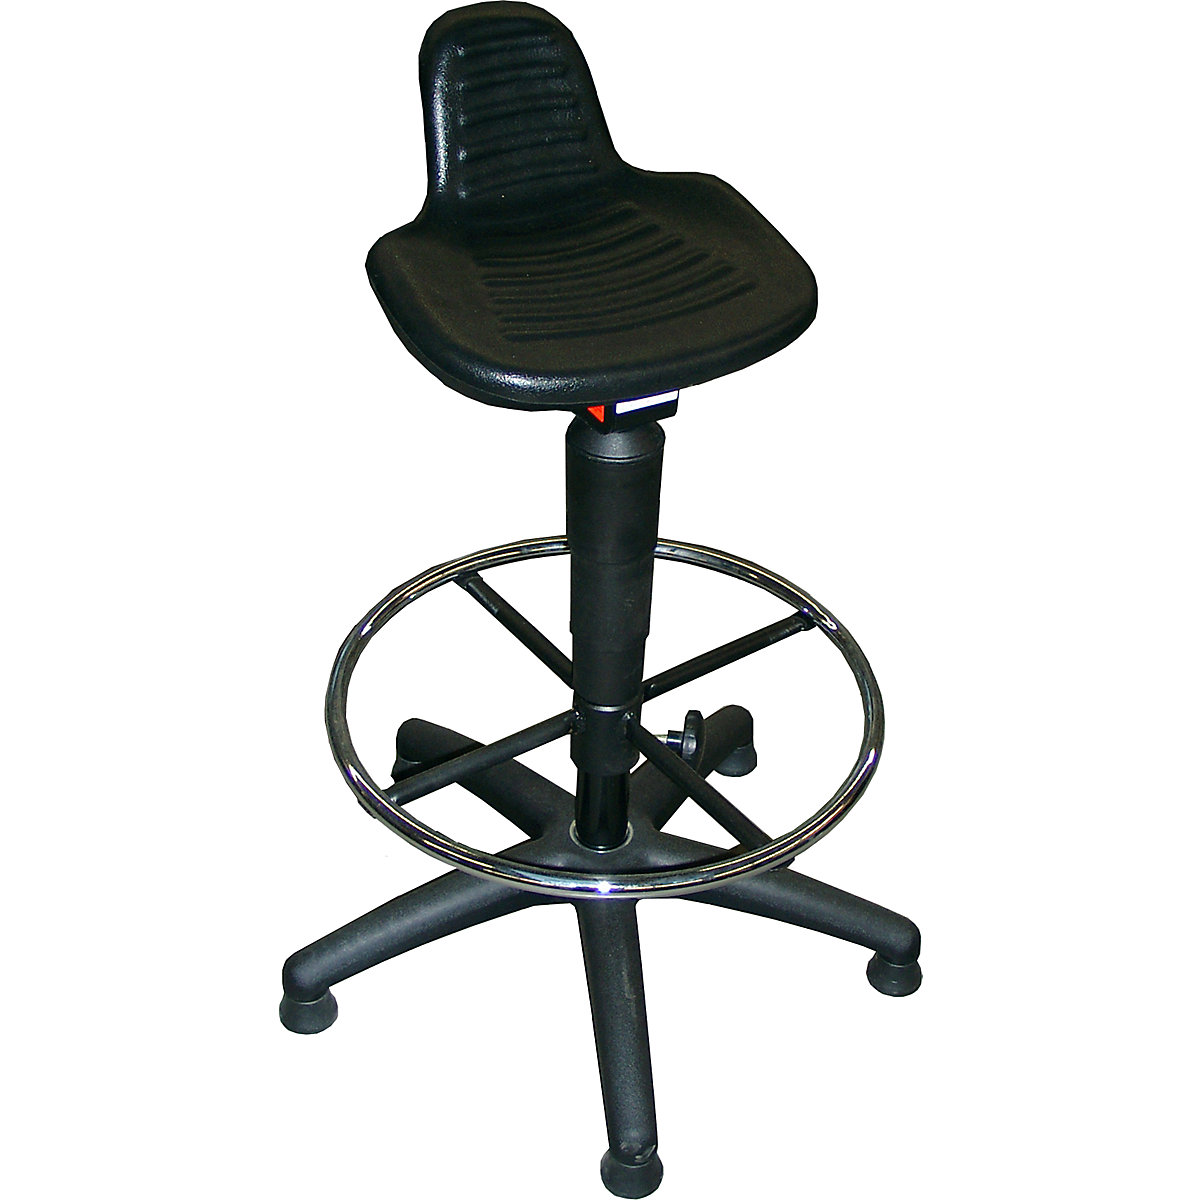 Industrial stool – meychair, polyurethane foam seat, with floor glides and foot ring